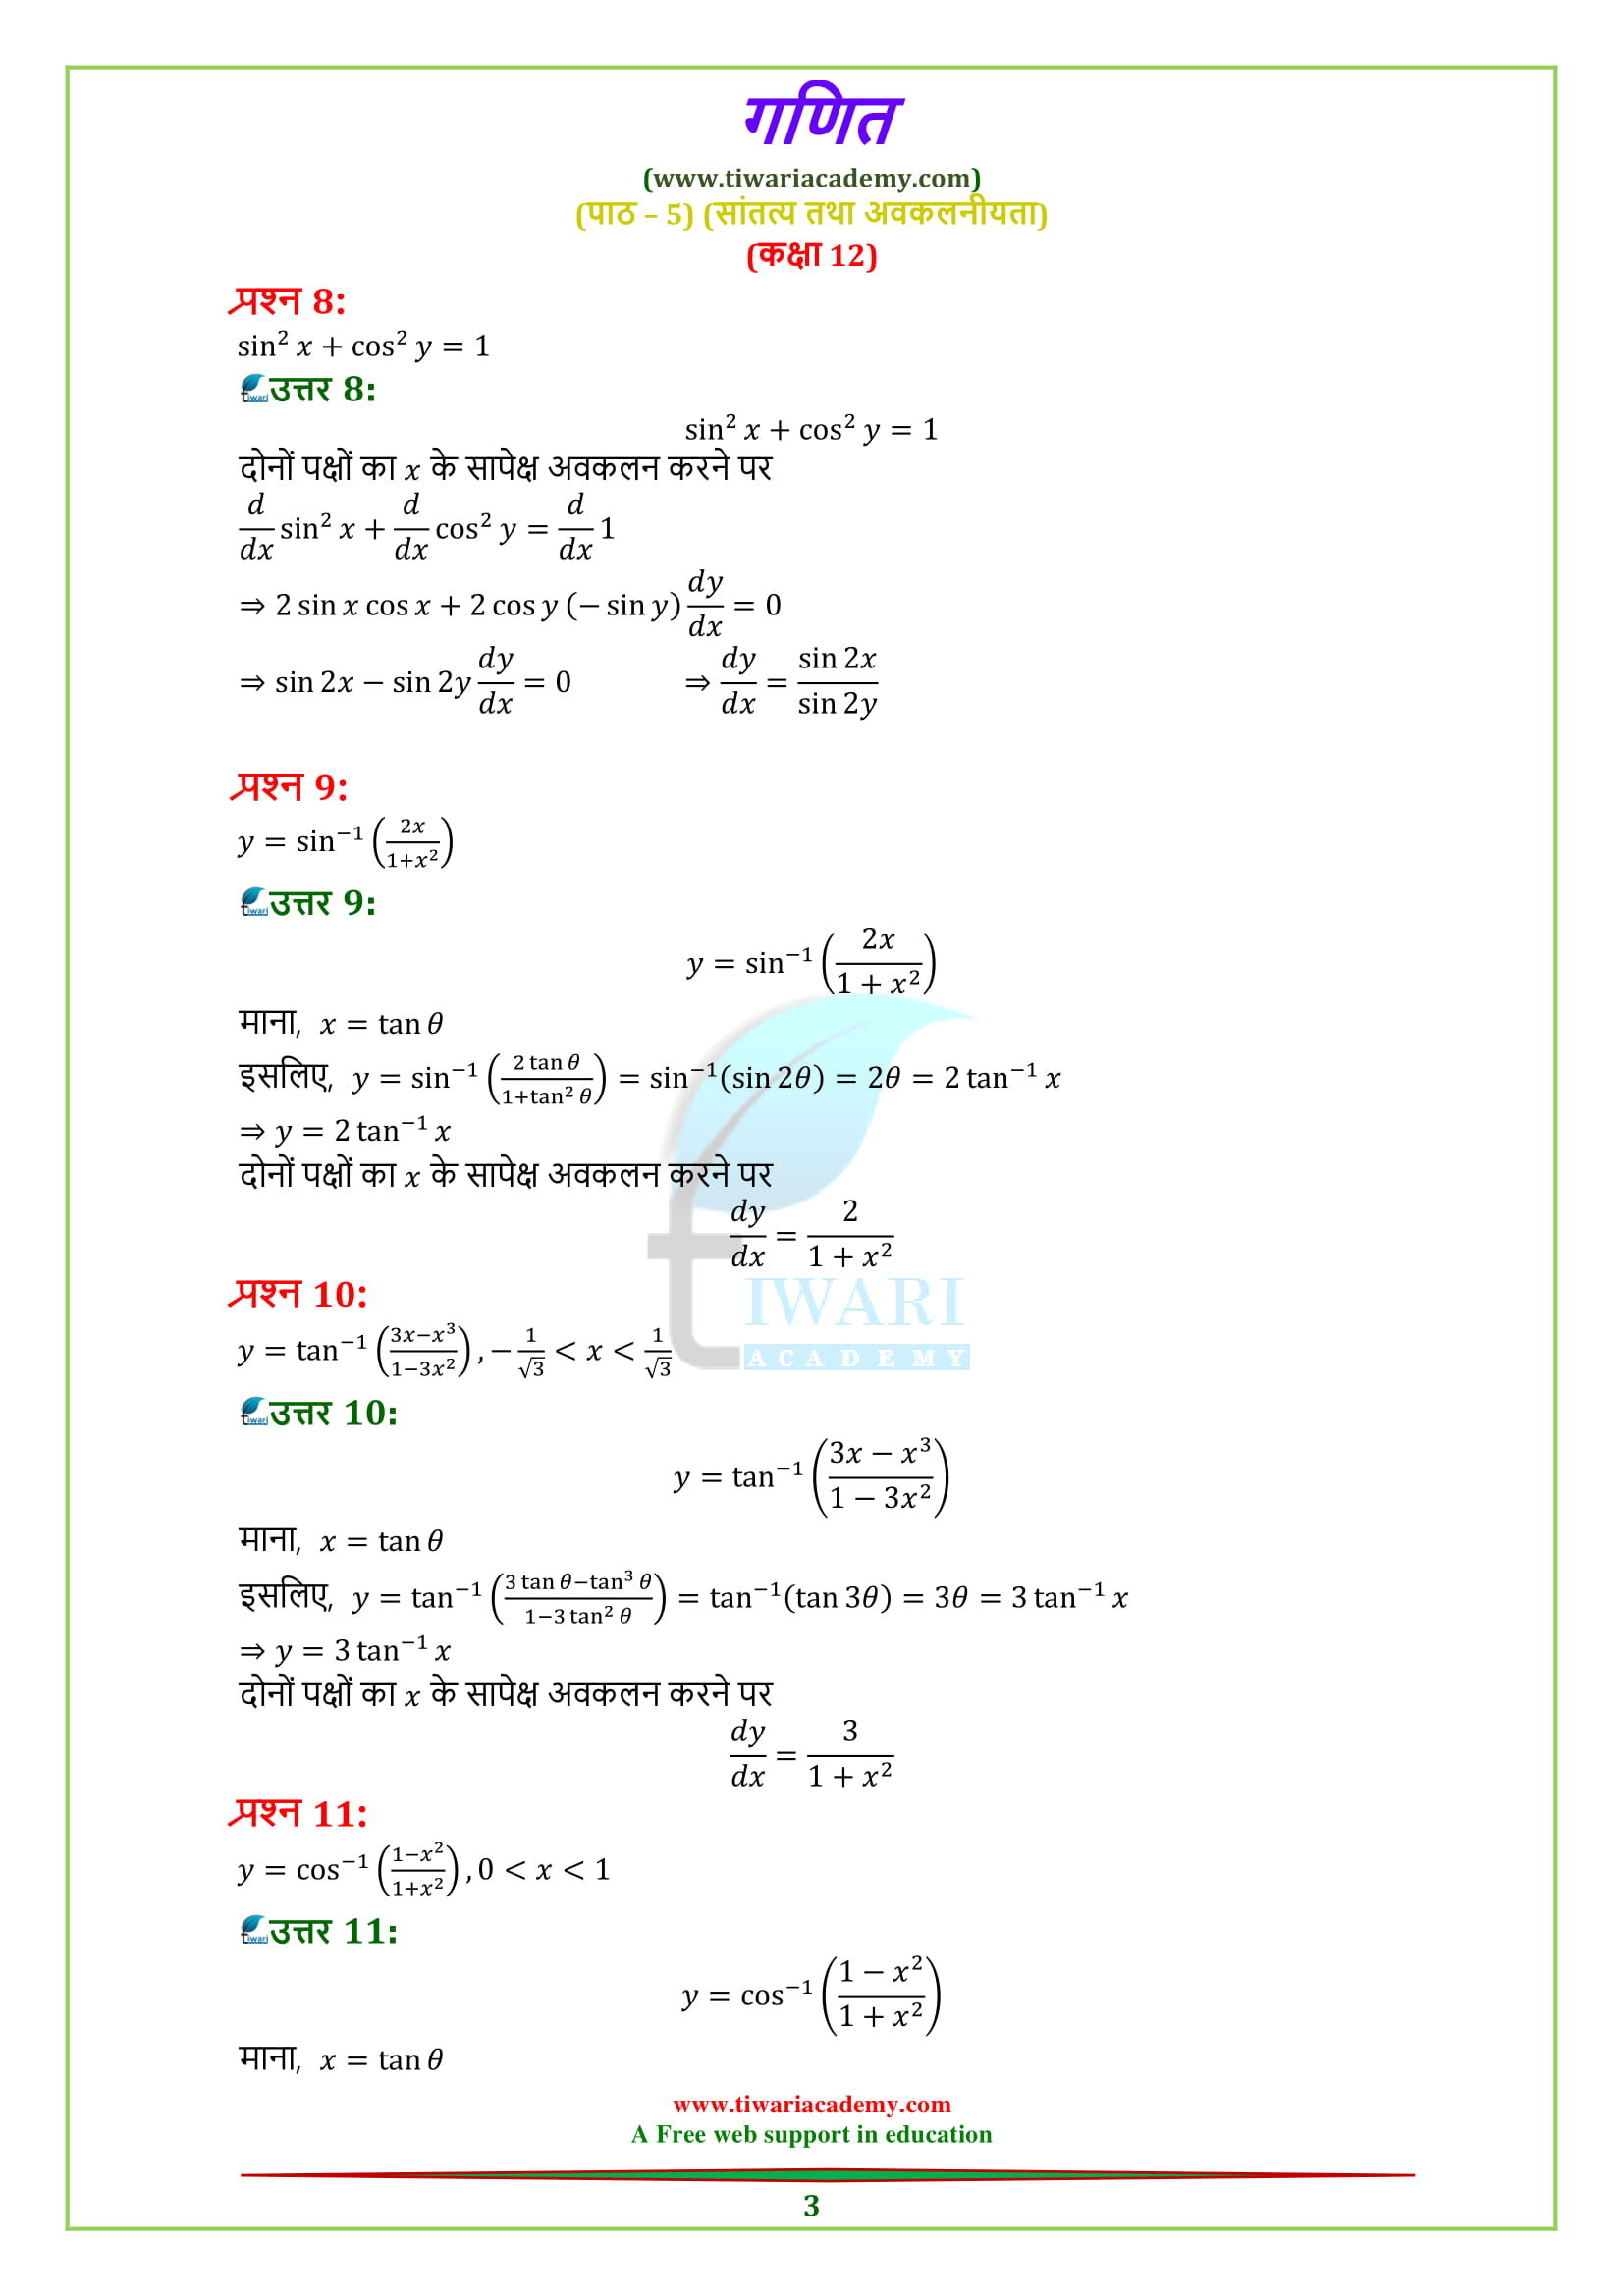 12 Maths Chapter 5 Ex. 5.3 Solutions question 1, 2, 3, 4, 5, 6, 7